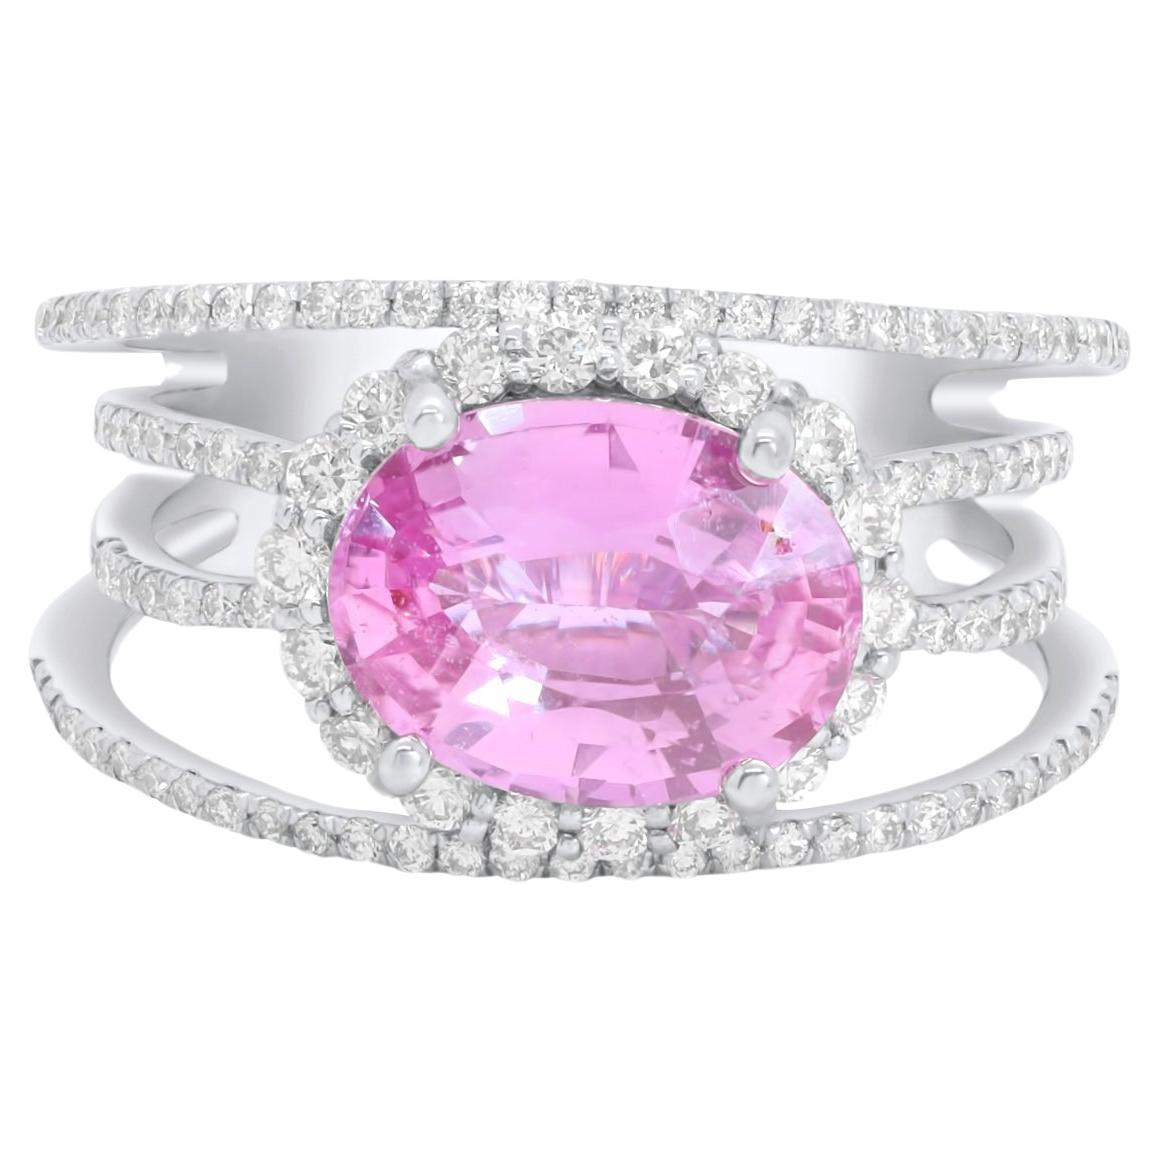 Diana M. 18 kt white gold  pink sapphire diamond ring featuring a 2.86 ct